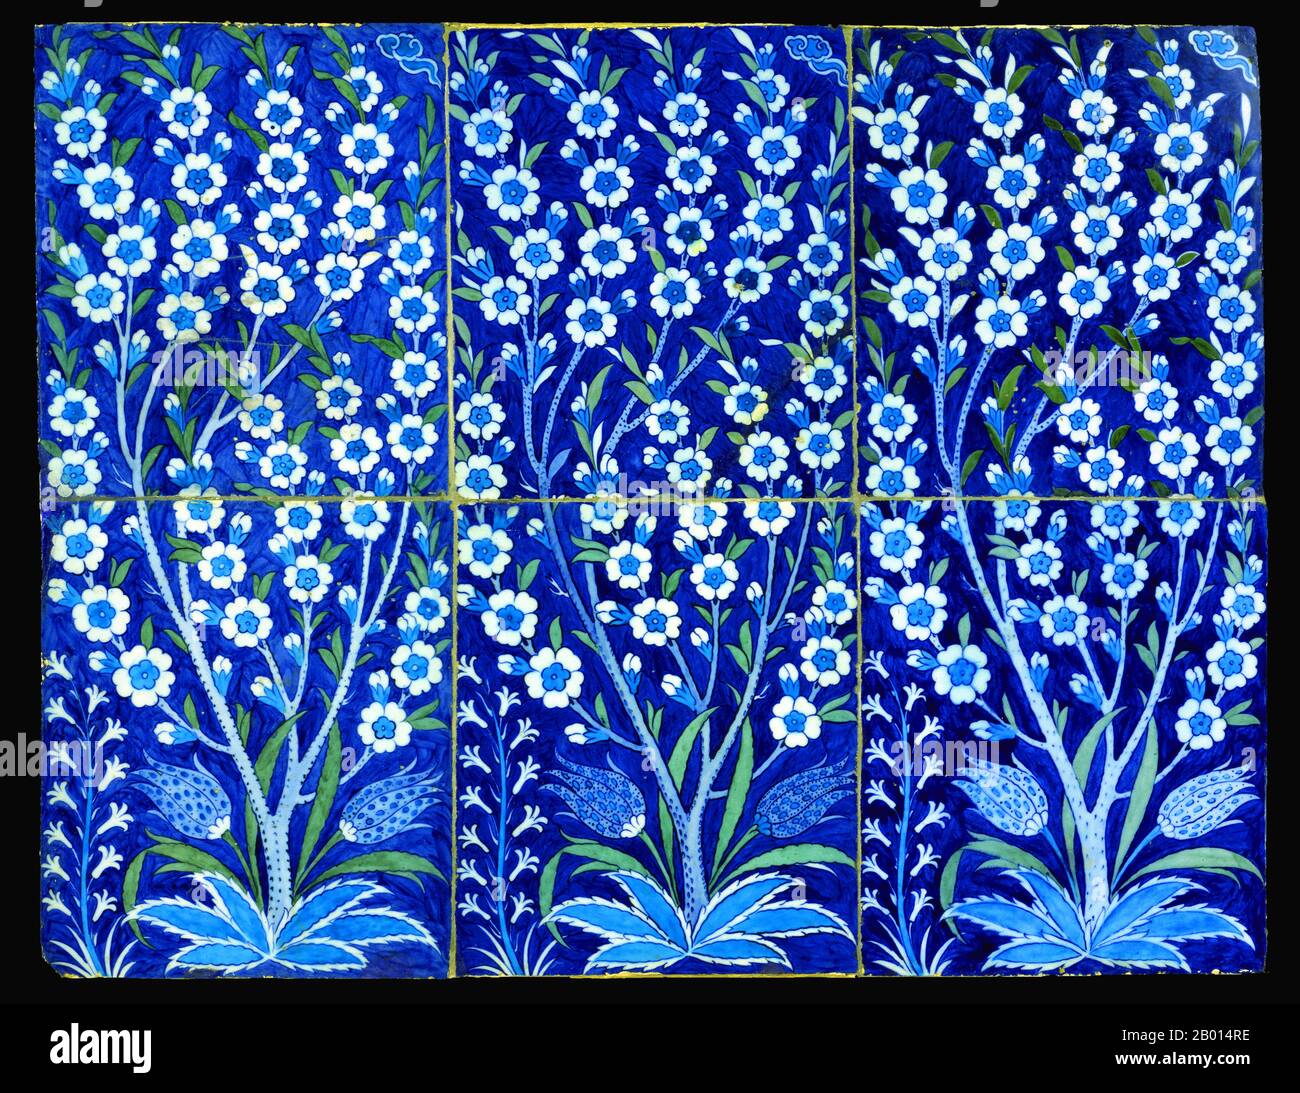 Turkey: A panel of six glazed fritware tiles, c. 1540.  Fritware tiles featuring hyacinths, tulips, and cherry branches, probably from Iznik, mid 16th century. Stock Photo